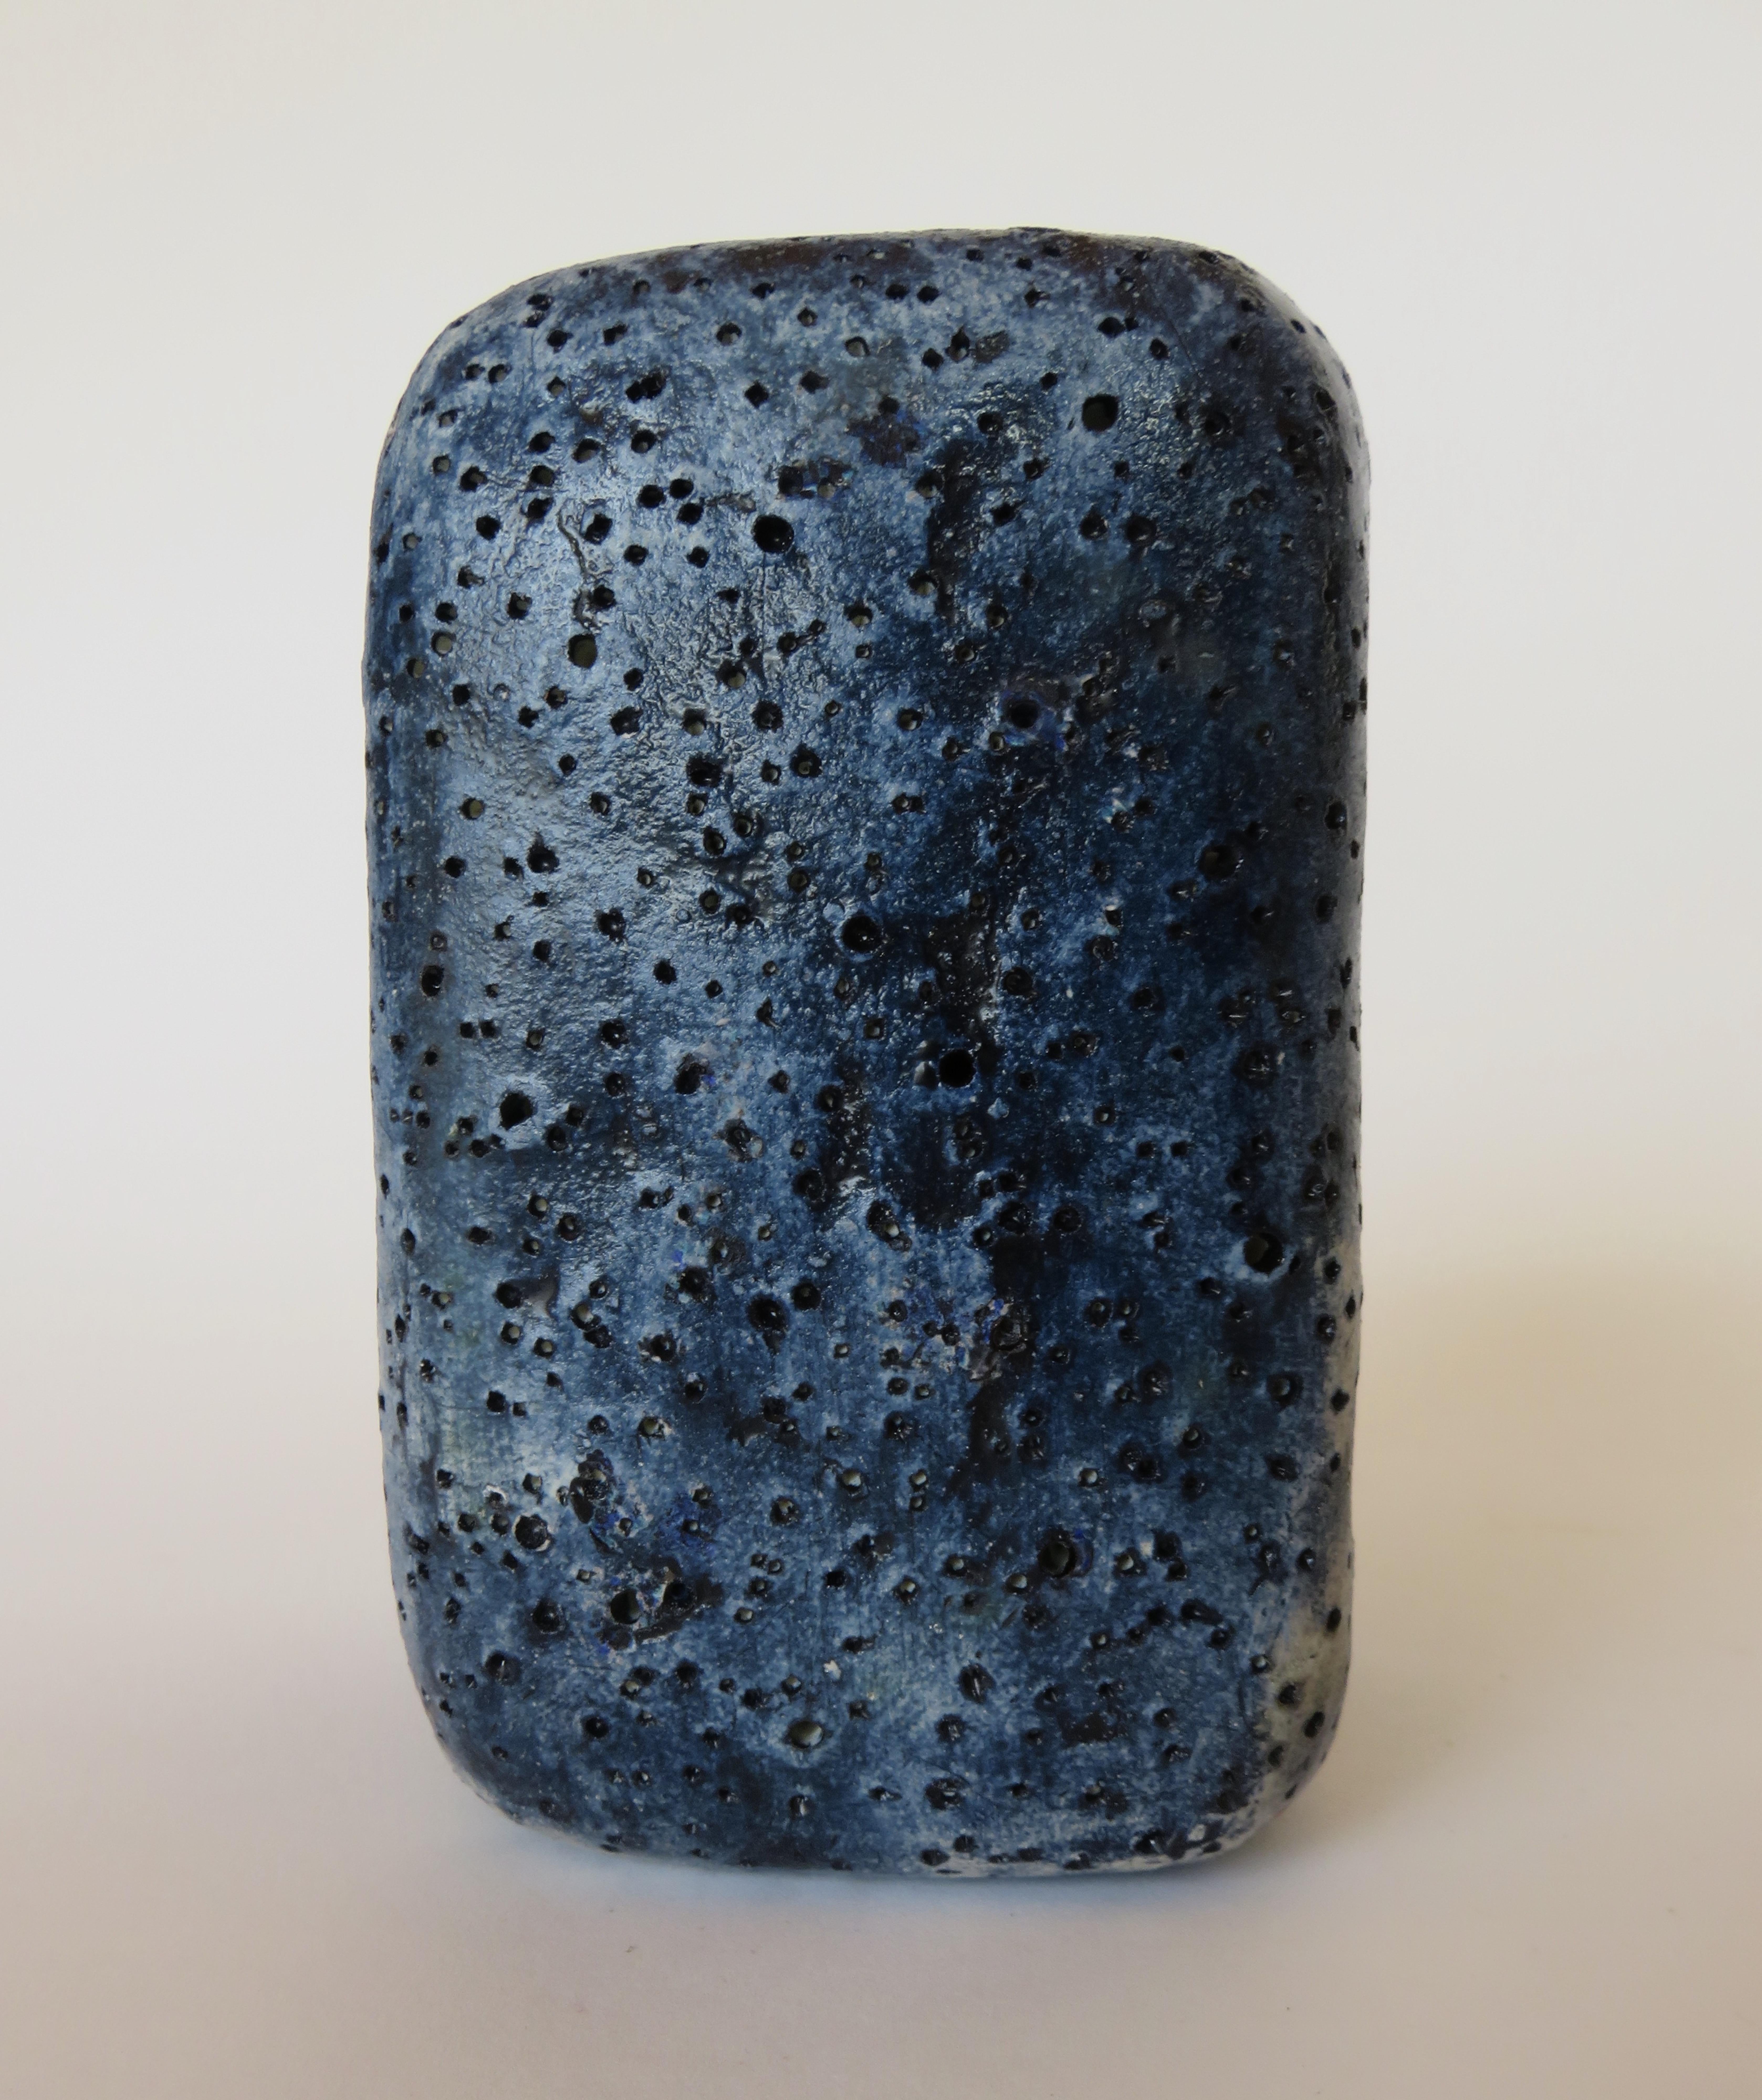 Hand Textured Ceramic Sculpture, Oblong Cube with Oval Opening in Deep Blue Wash 7